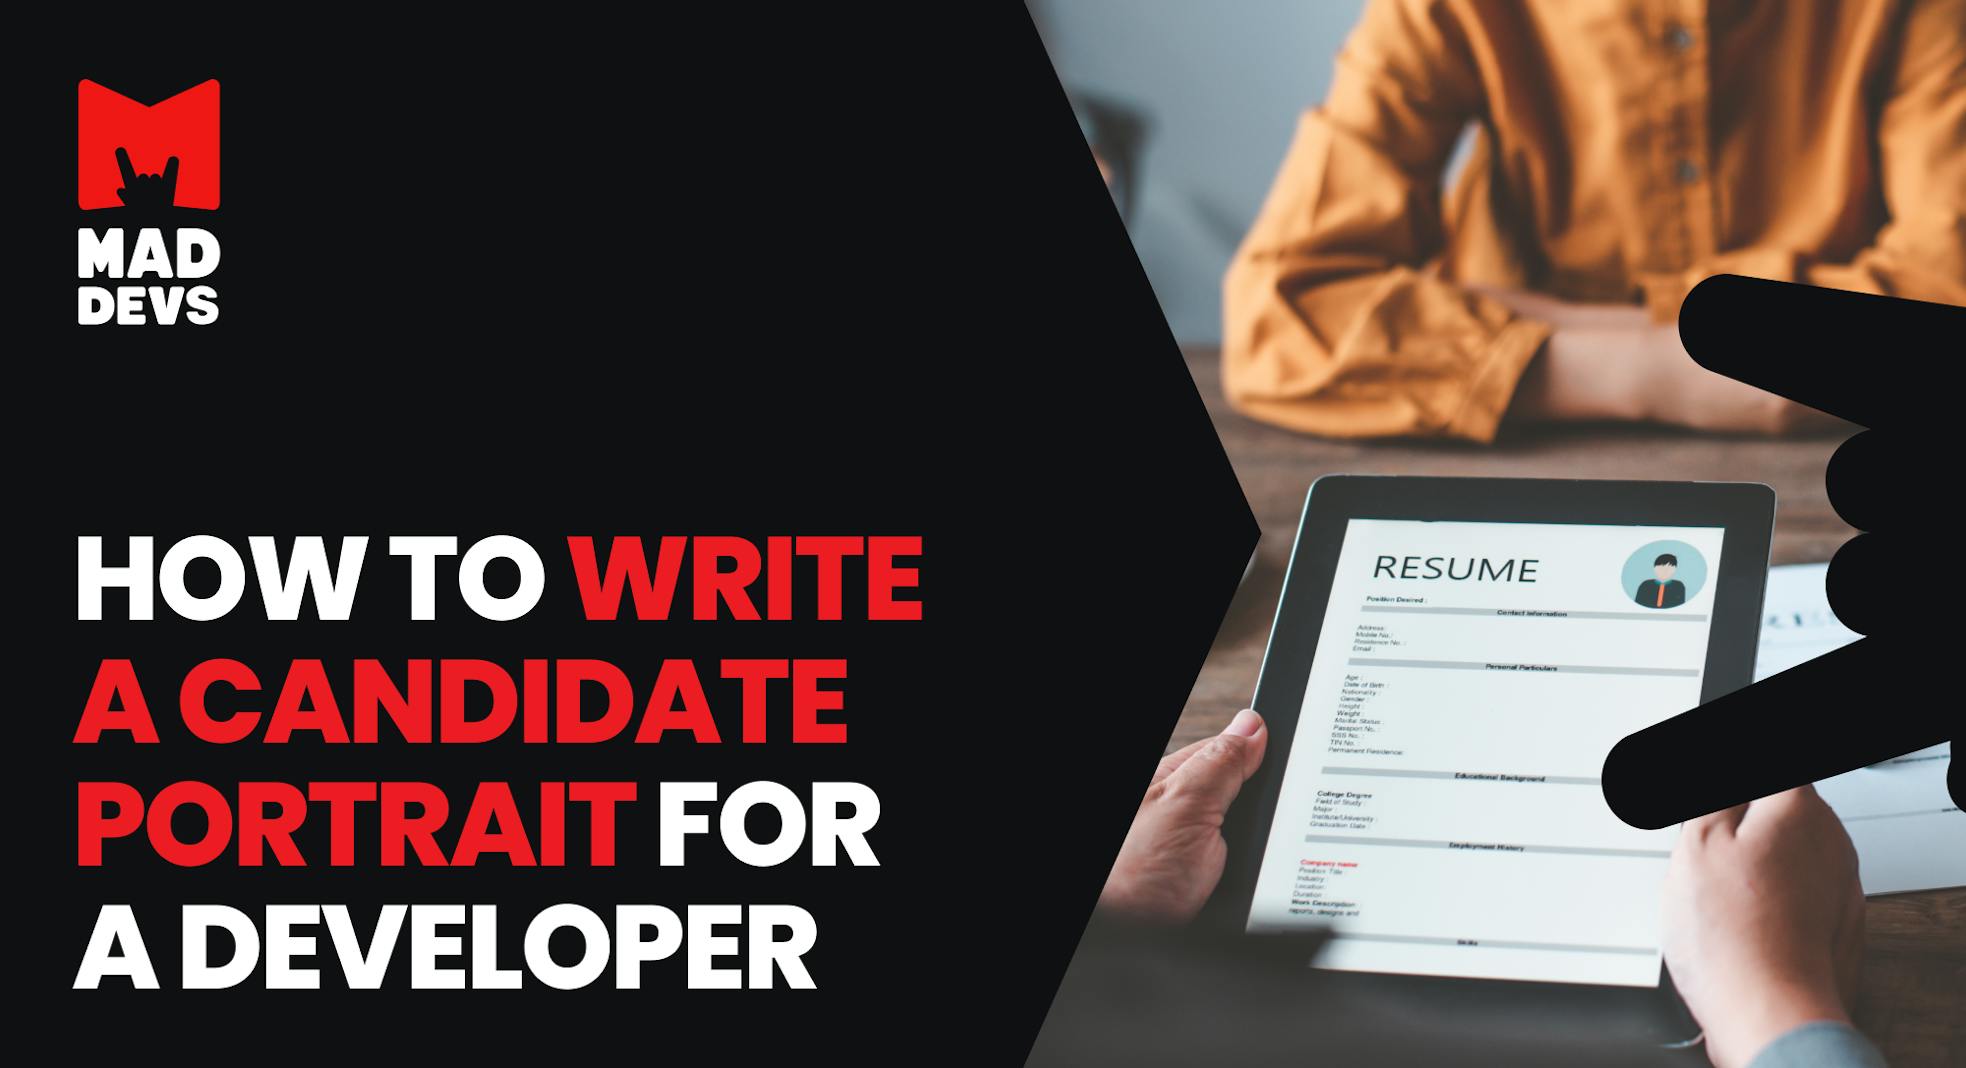 How to Write a Candidate Portrait for a Developer